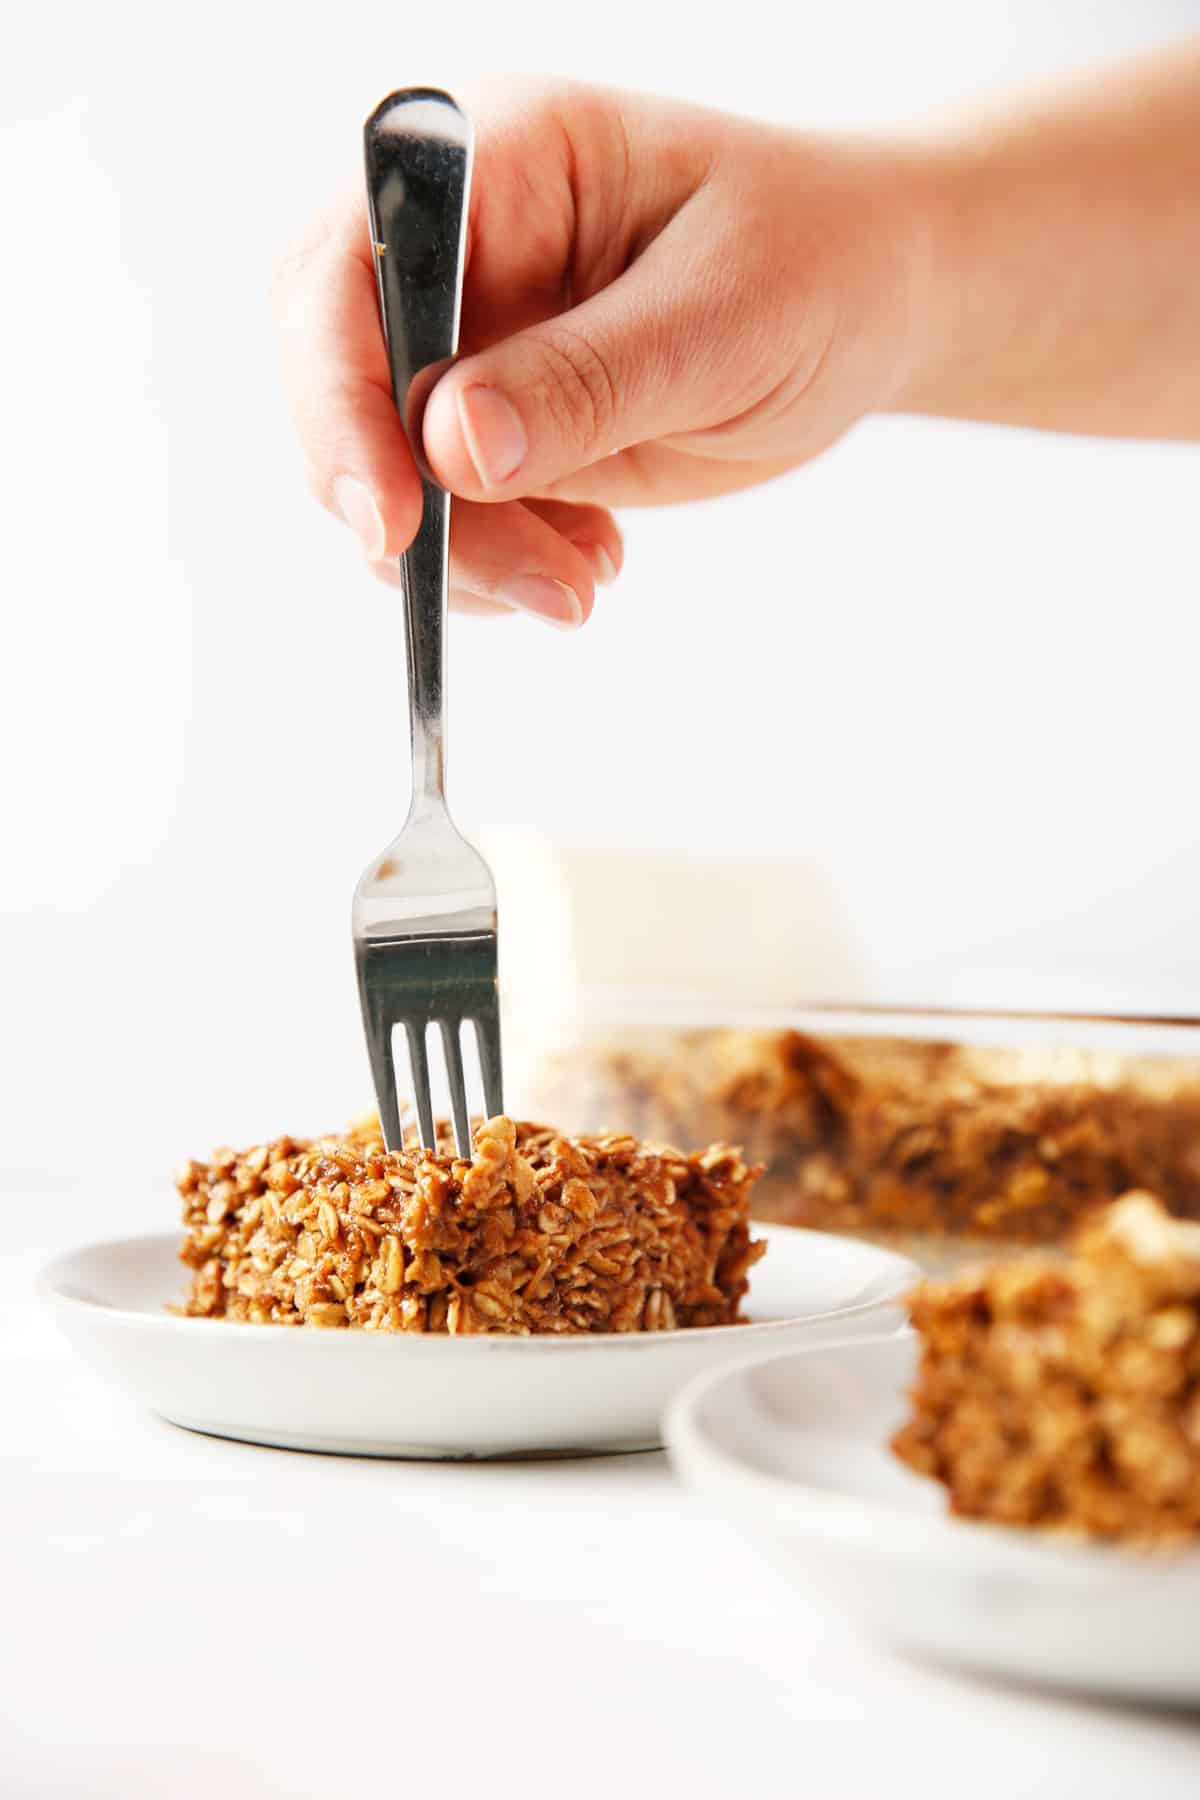 a hand holding a fork and placing into a place of baked gingerbread oatmeal.
